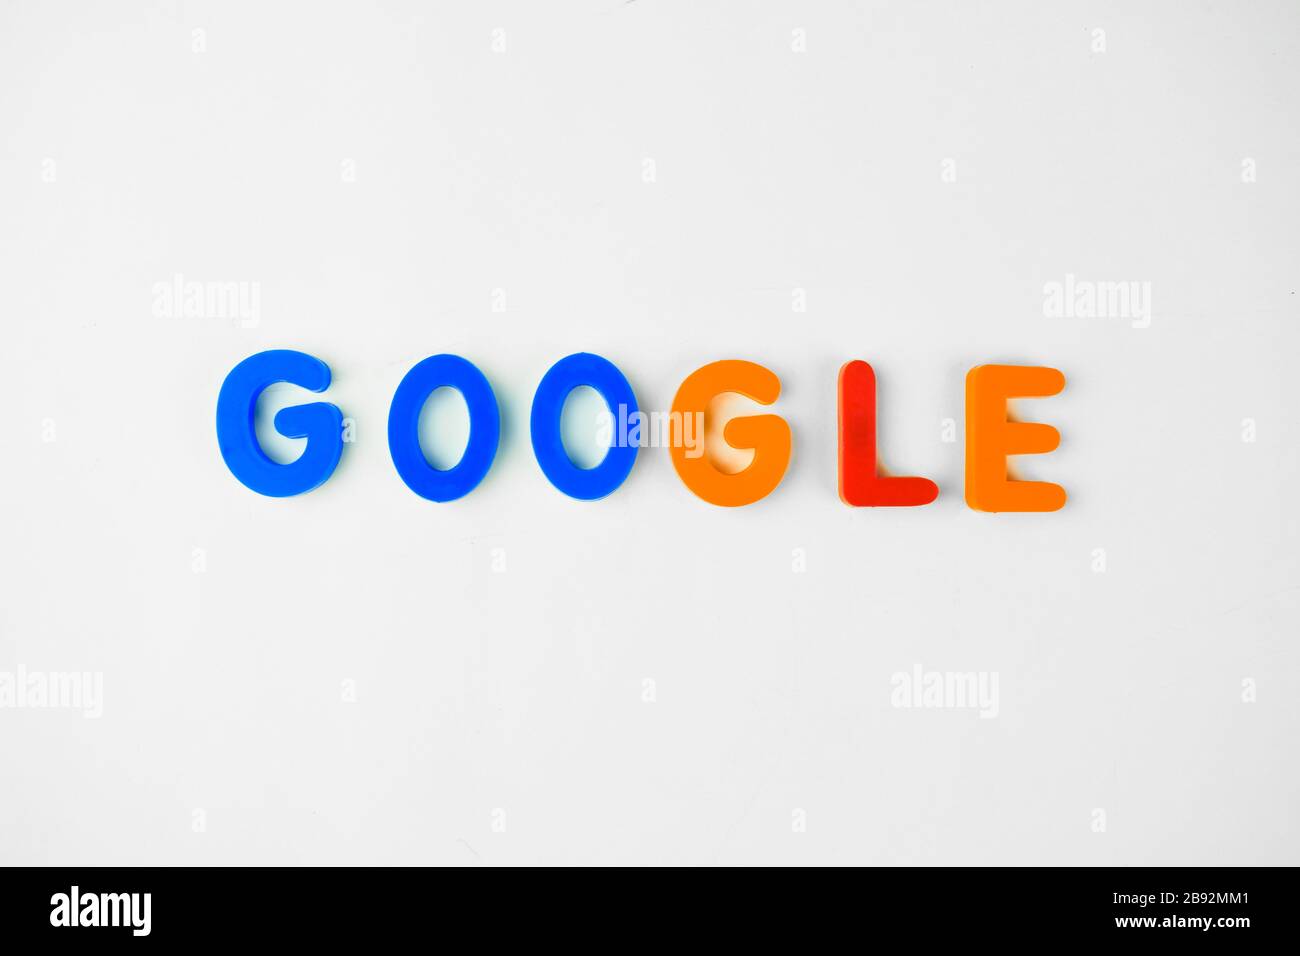 GOOGLE written in different colored letter blocks on an isolated white background Stock Photo